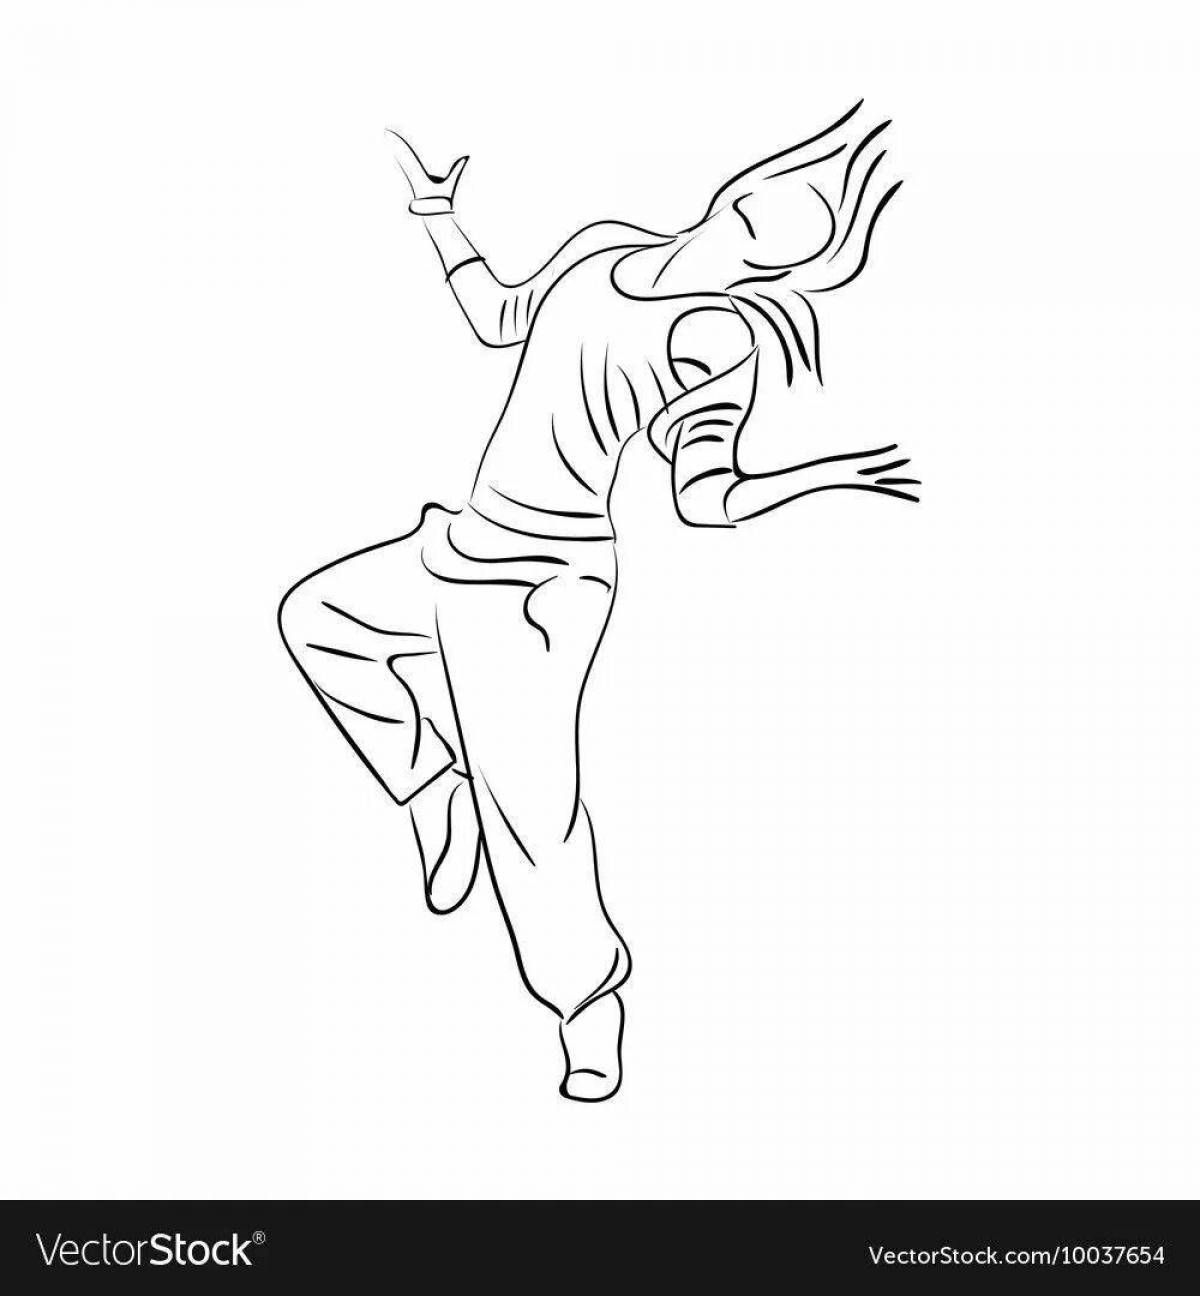 Color-frenzy hip-hop coloring page